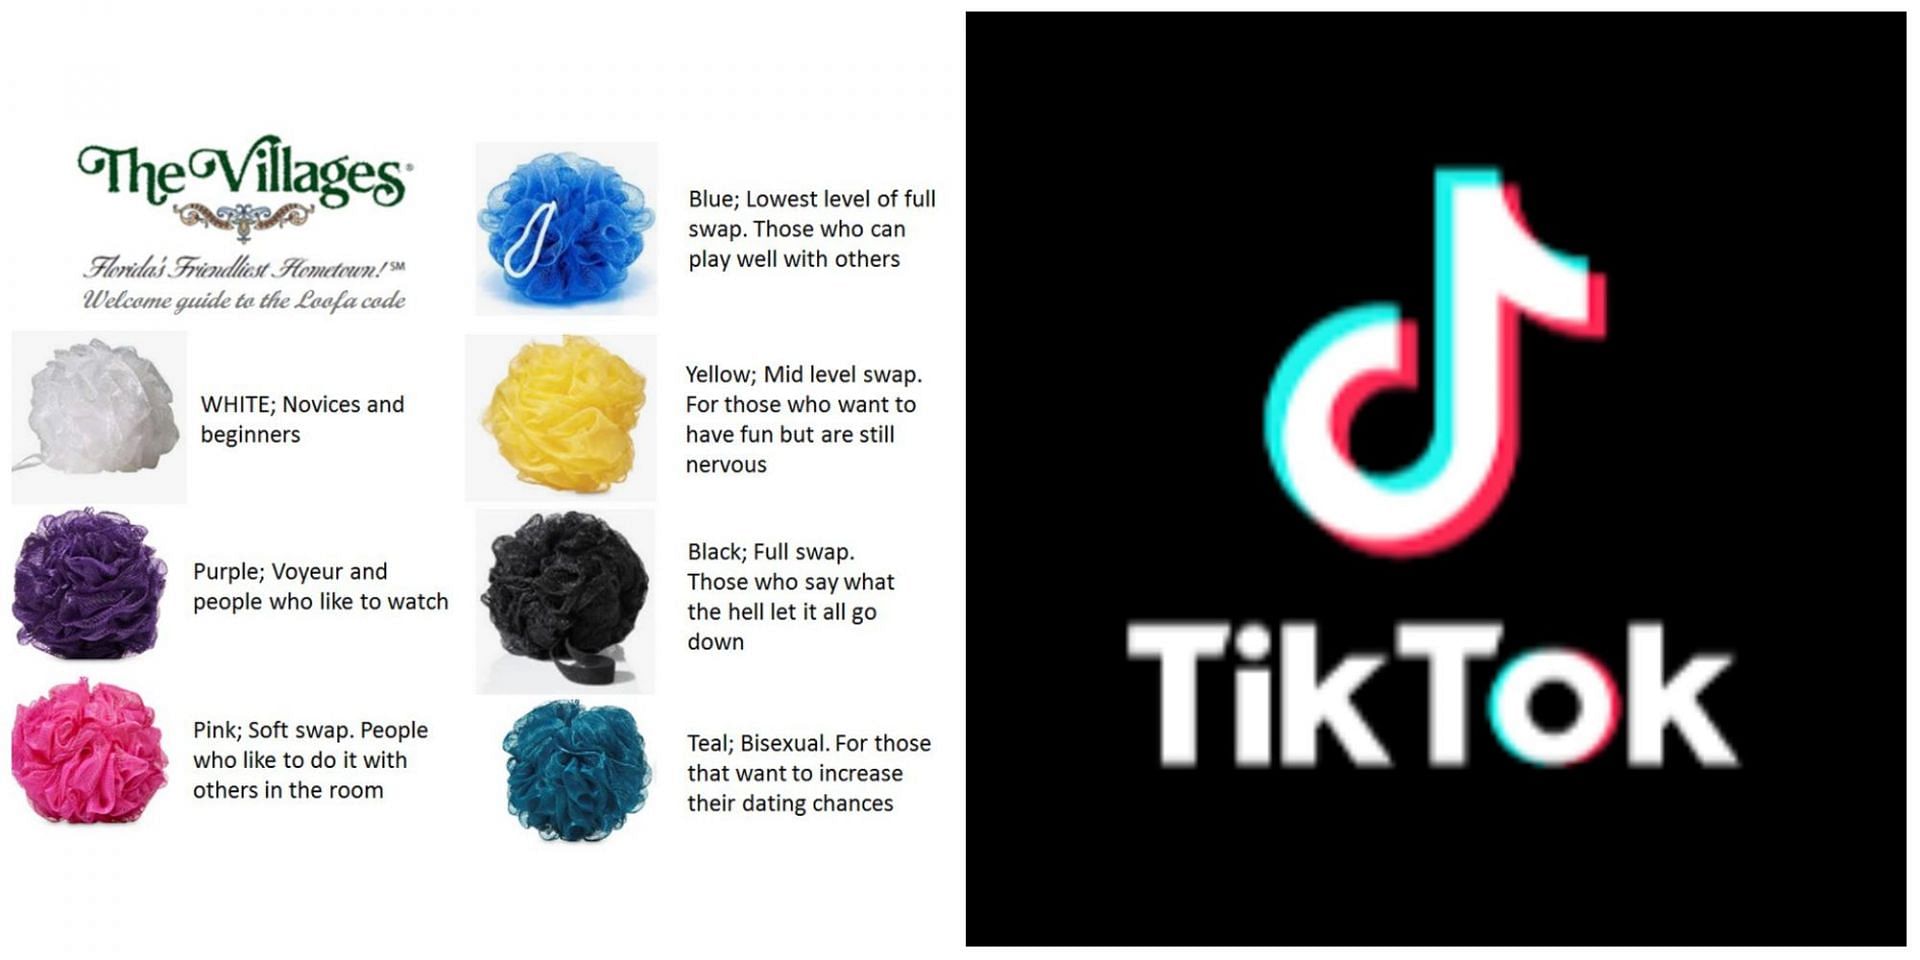 Social media users share their reaction to the loofa trend in Florida. (Image via TikTok)